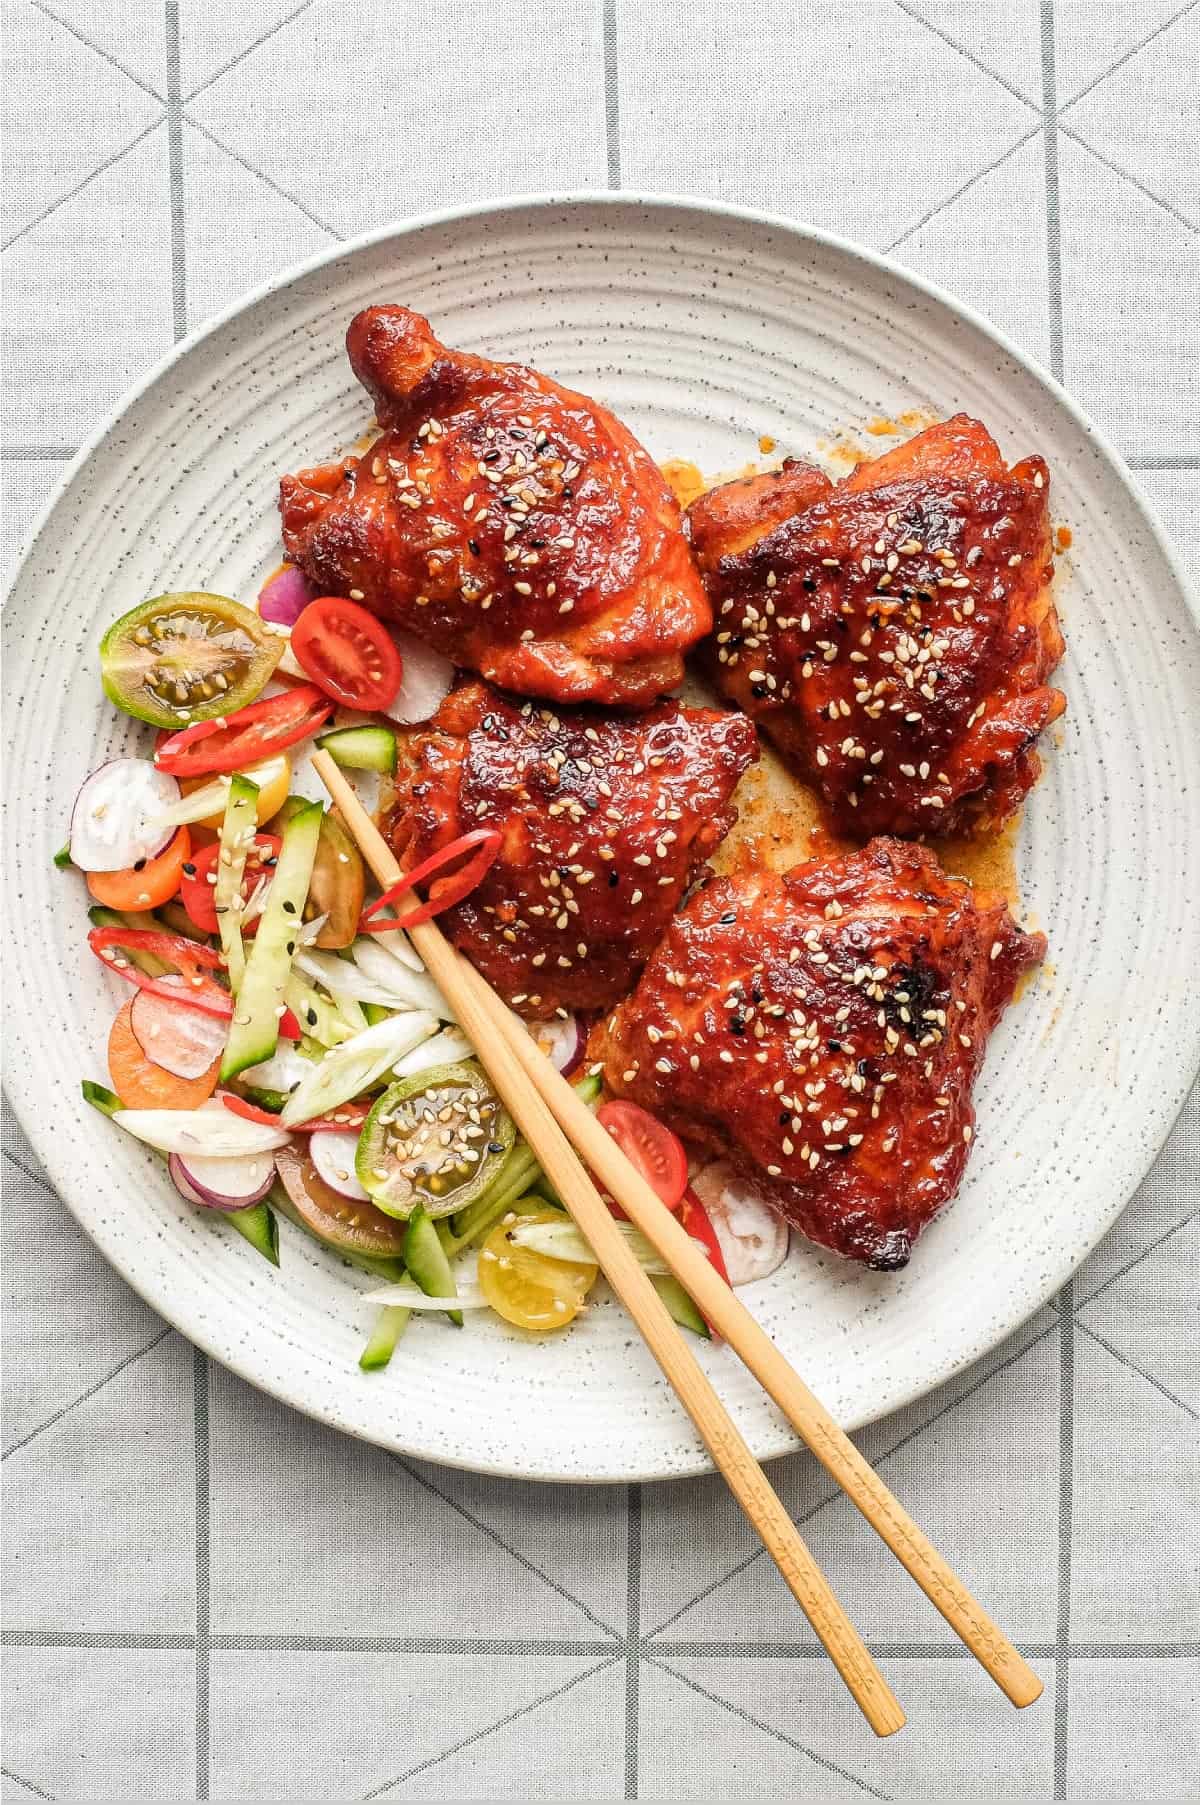 A plate of Korean Gochujang Chicken and chopsticks with salad on the side.